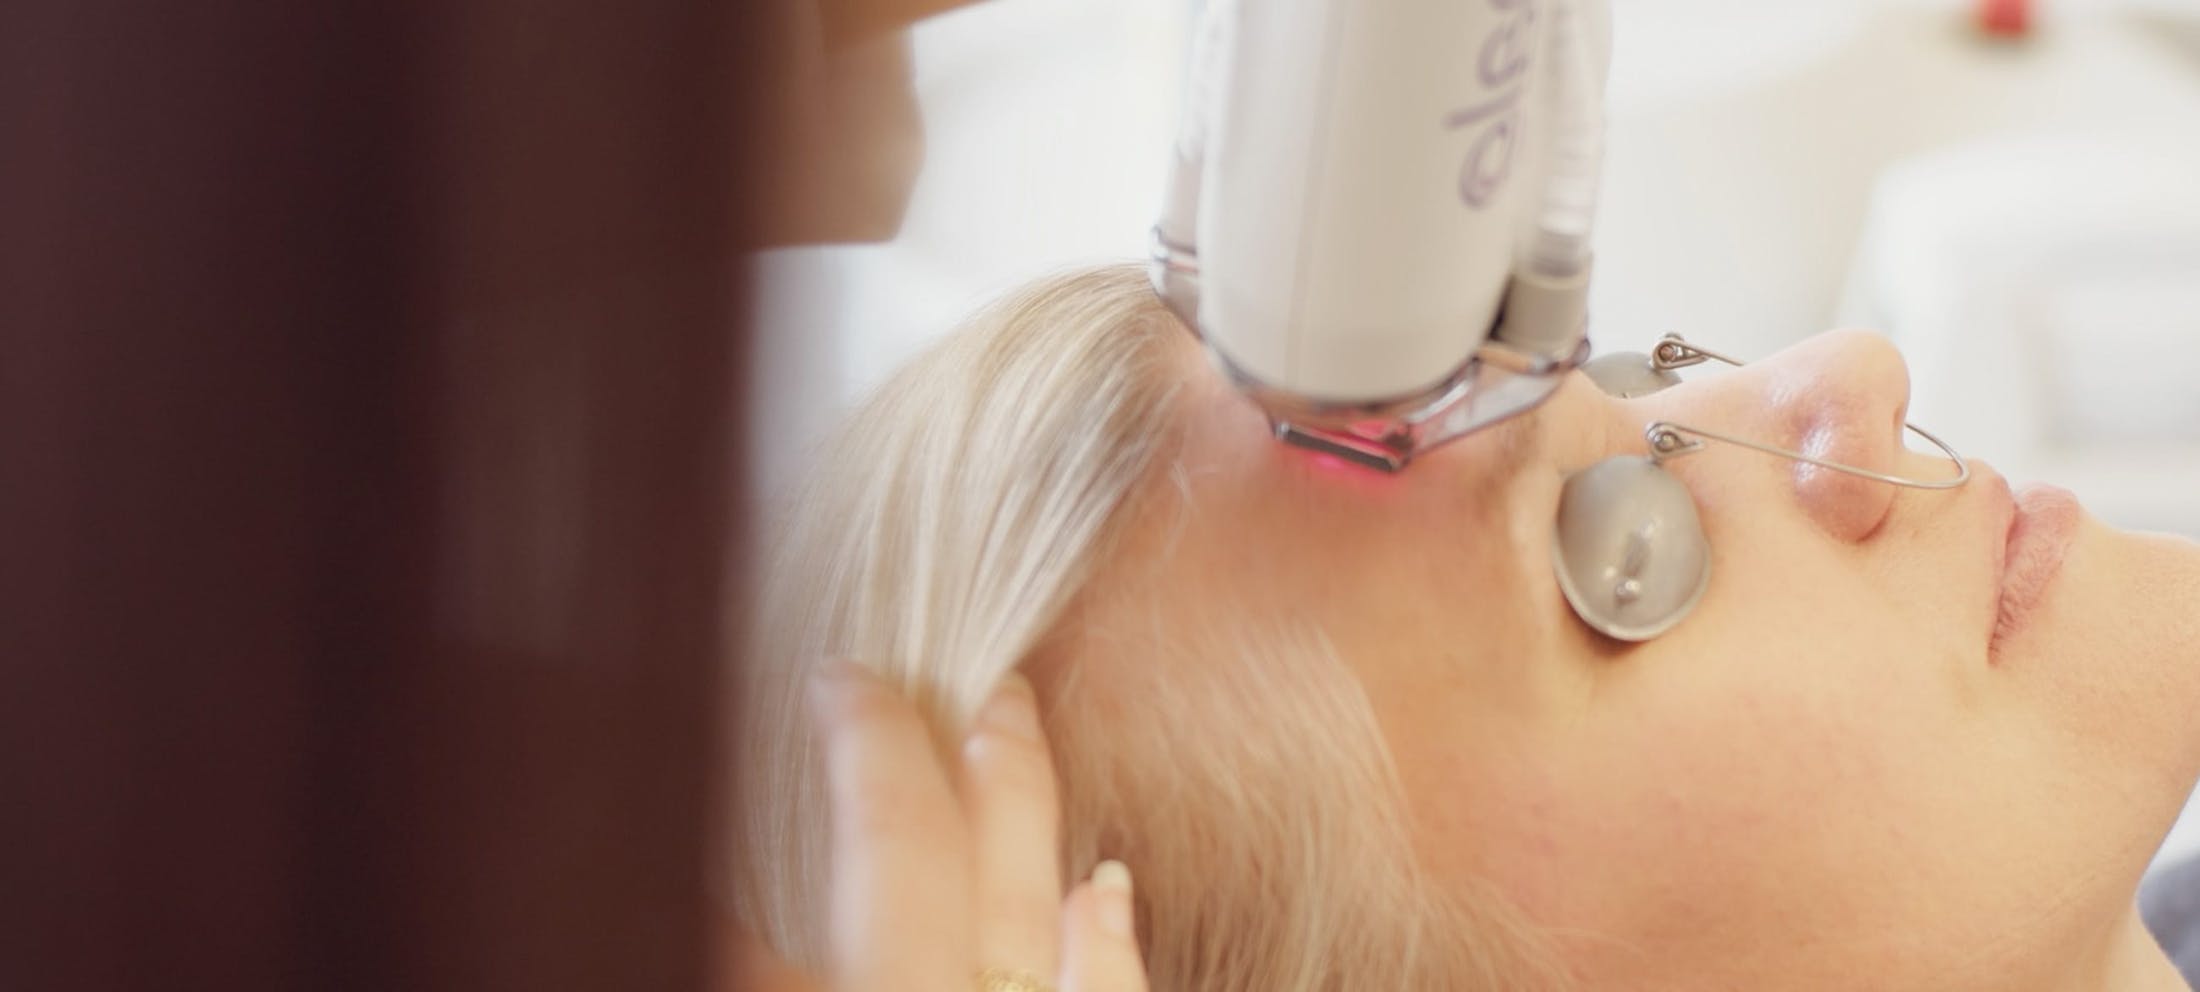 Woman receiving Halo Laser treatment at The Piazza Center